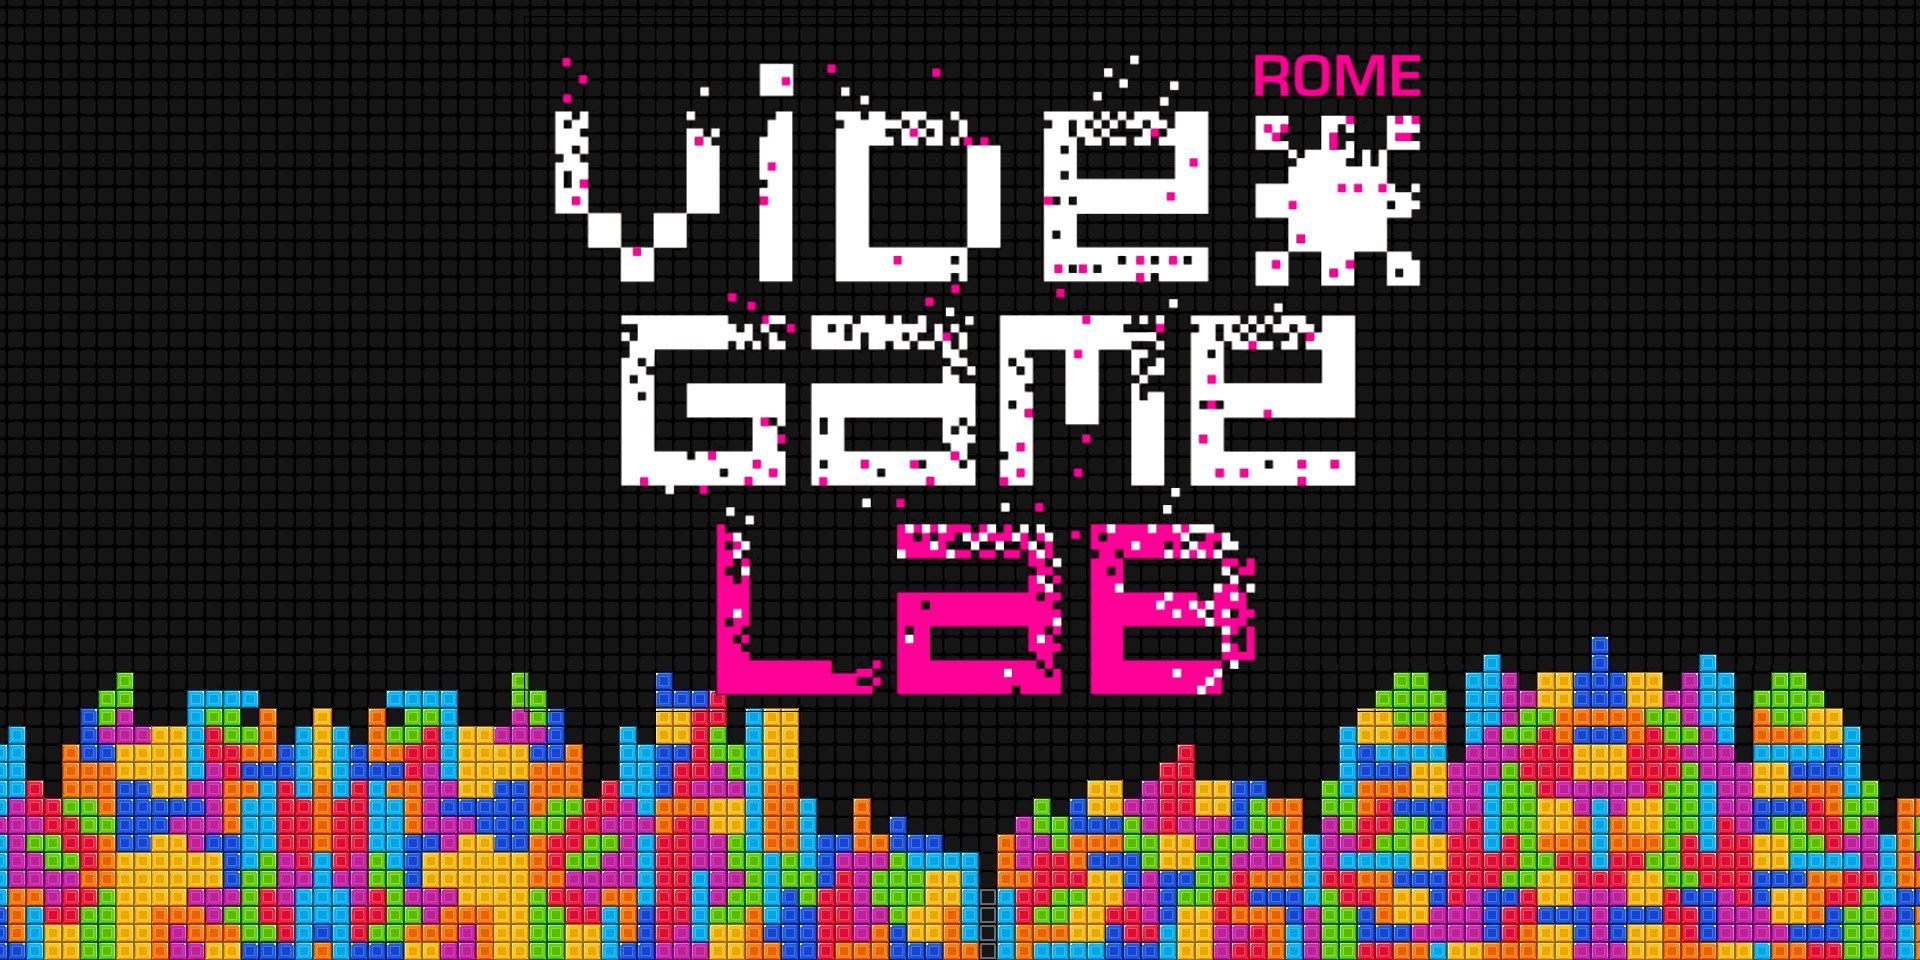 Rome Video Game Lab